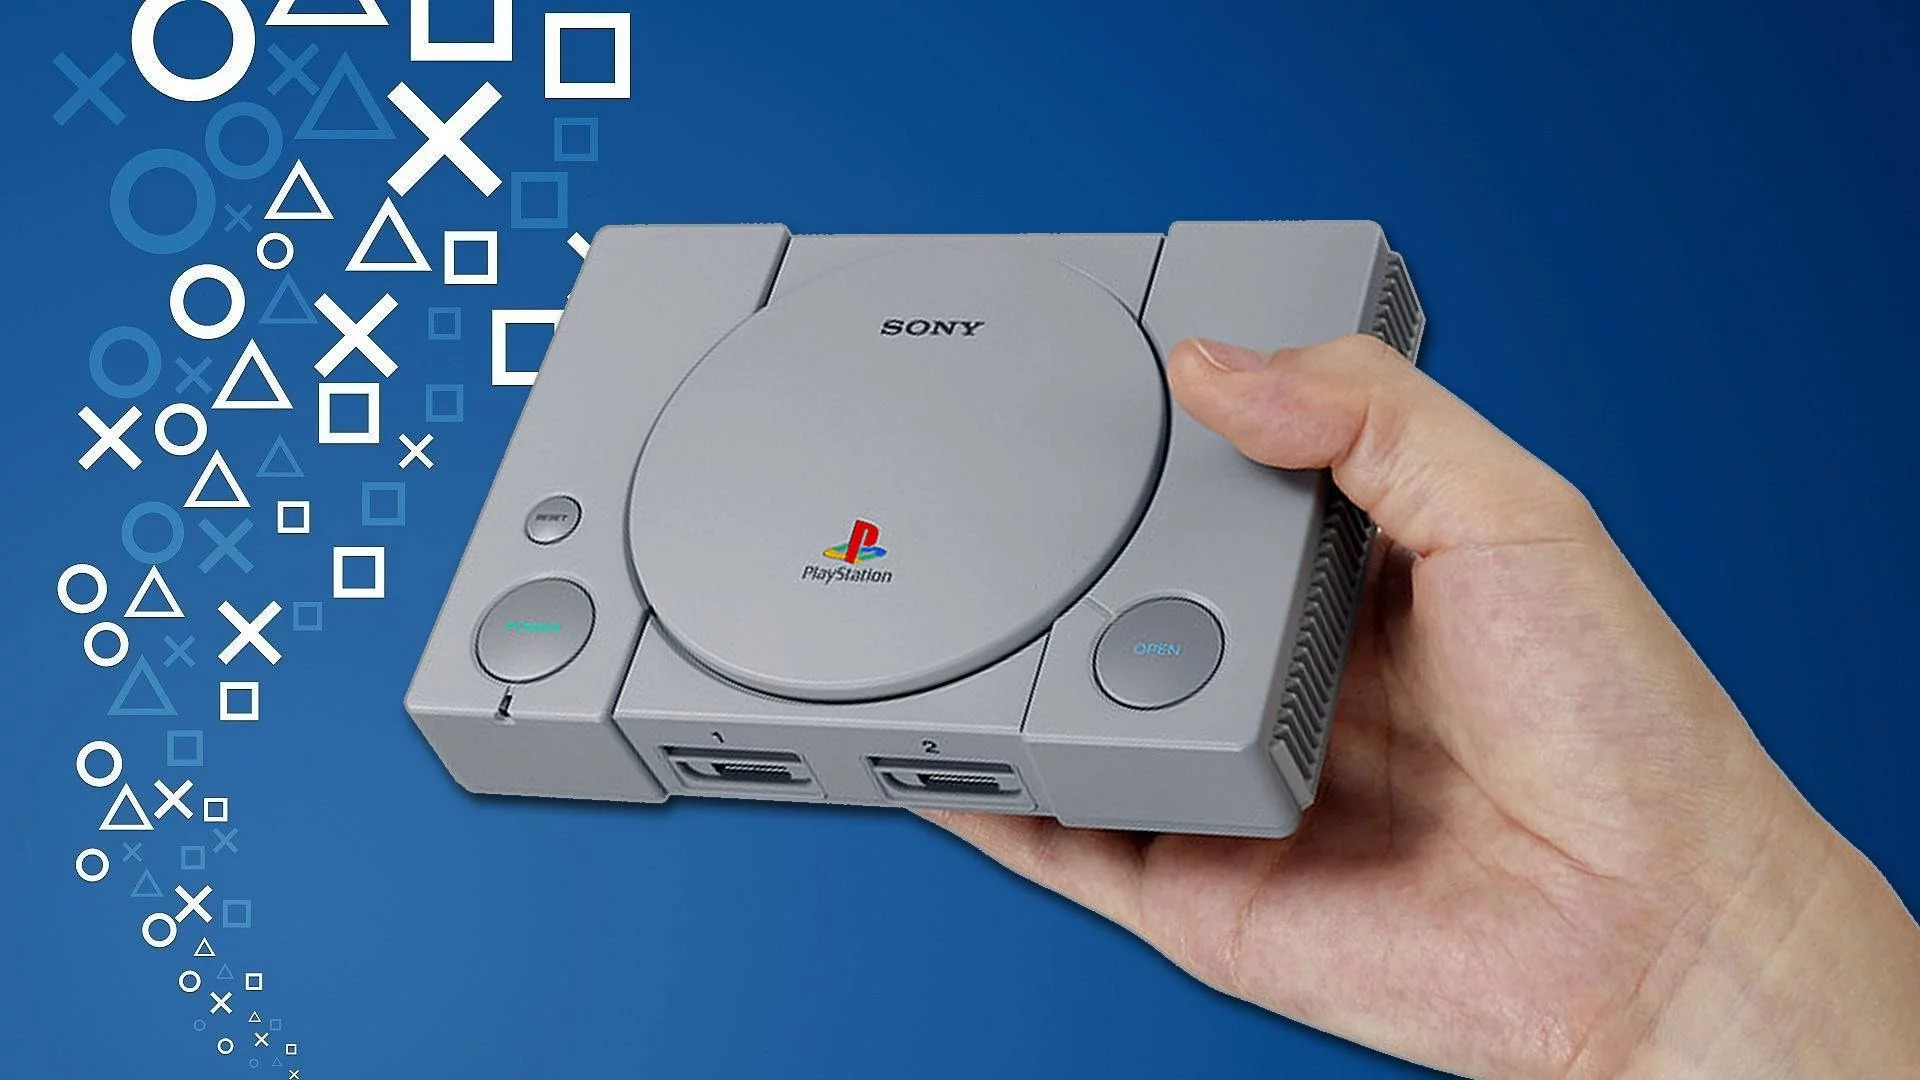 Sony playstation ремонтundefined. Ps1 Classic Mini. Sony ps1 Classic. Sony PLAYSTATION 1 Classic. Sony PLAYSTATION 1 Classic Mini.